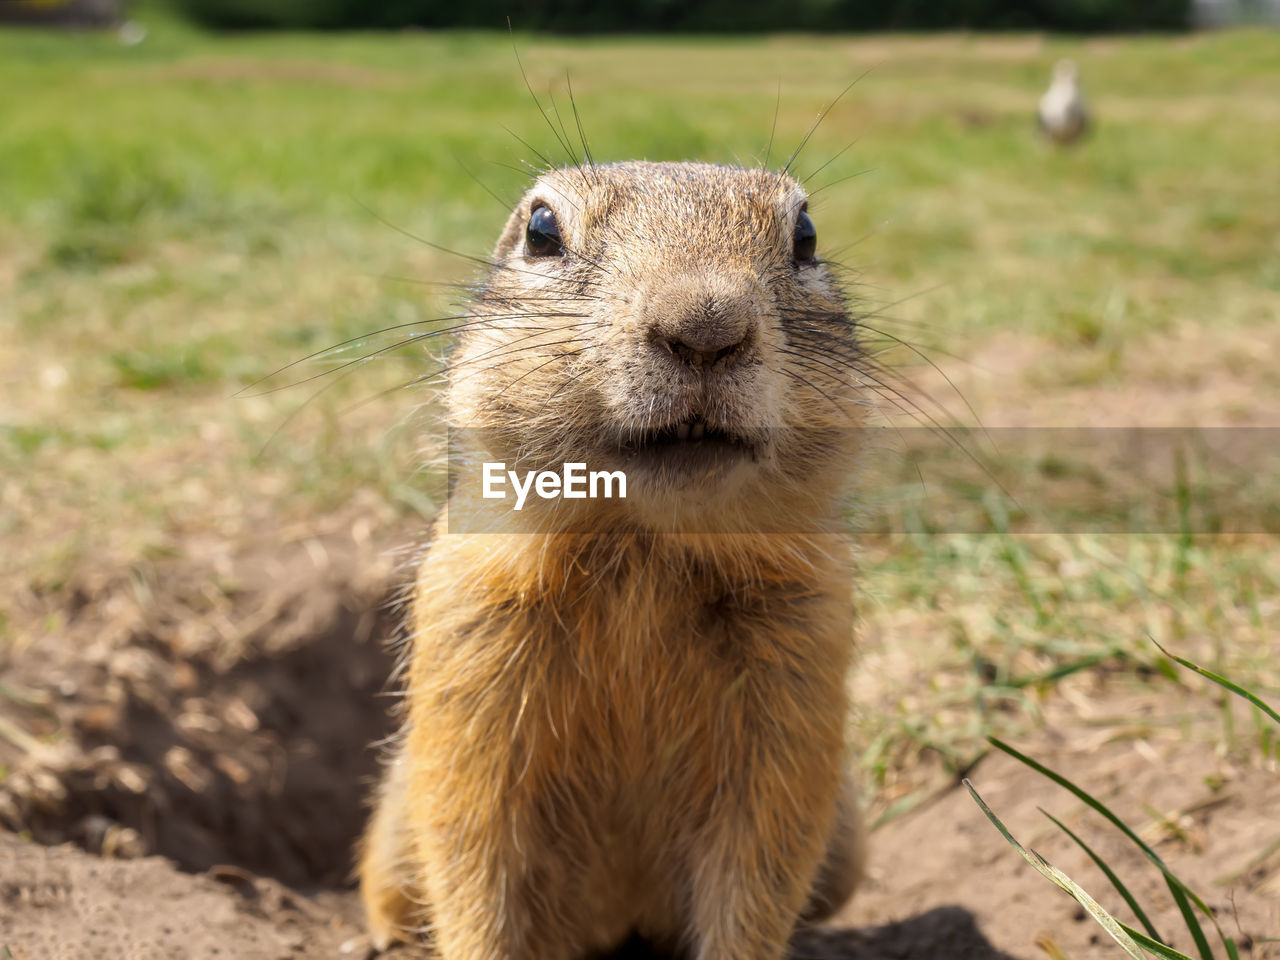 Gopher is smiling and looking at the camera on the lawn. close-up. portrait of a rodent.